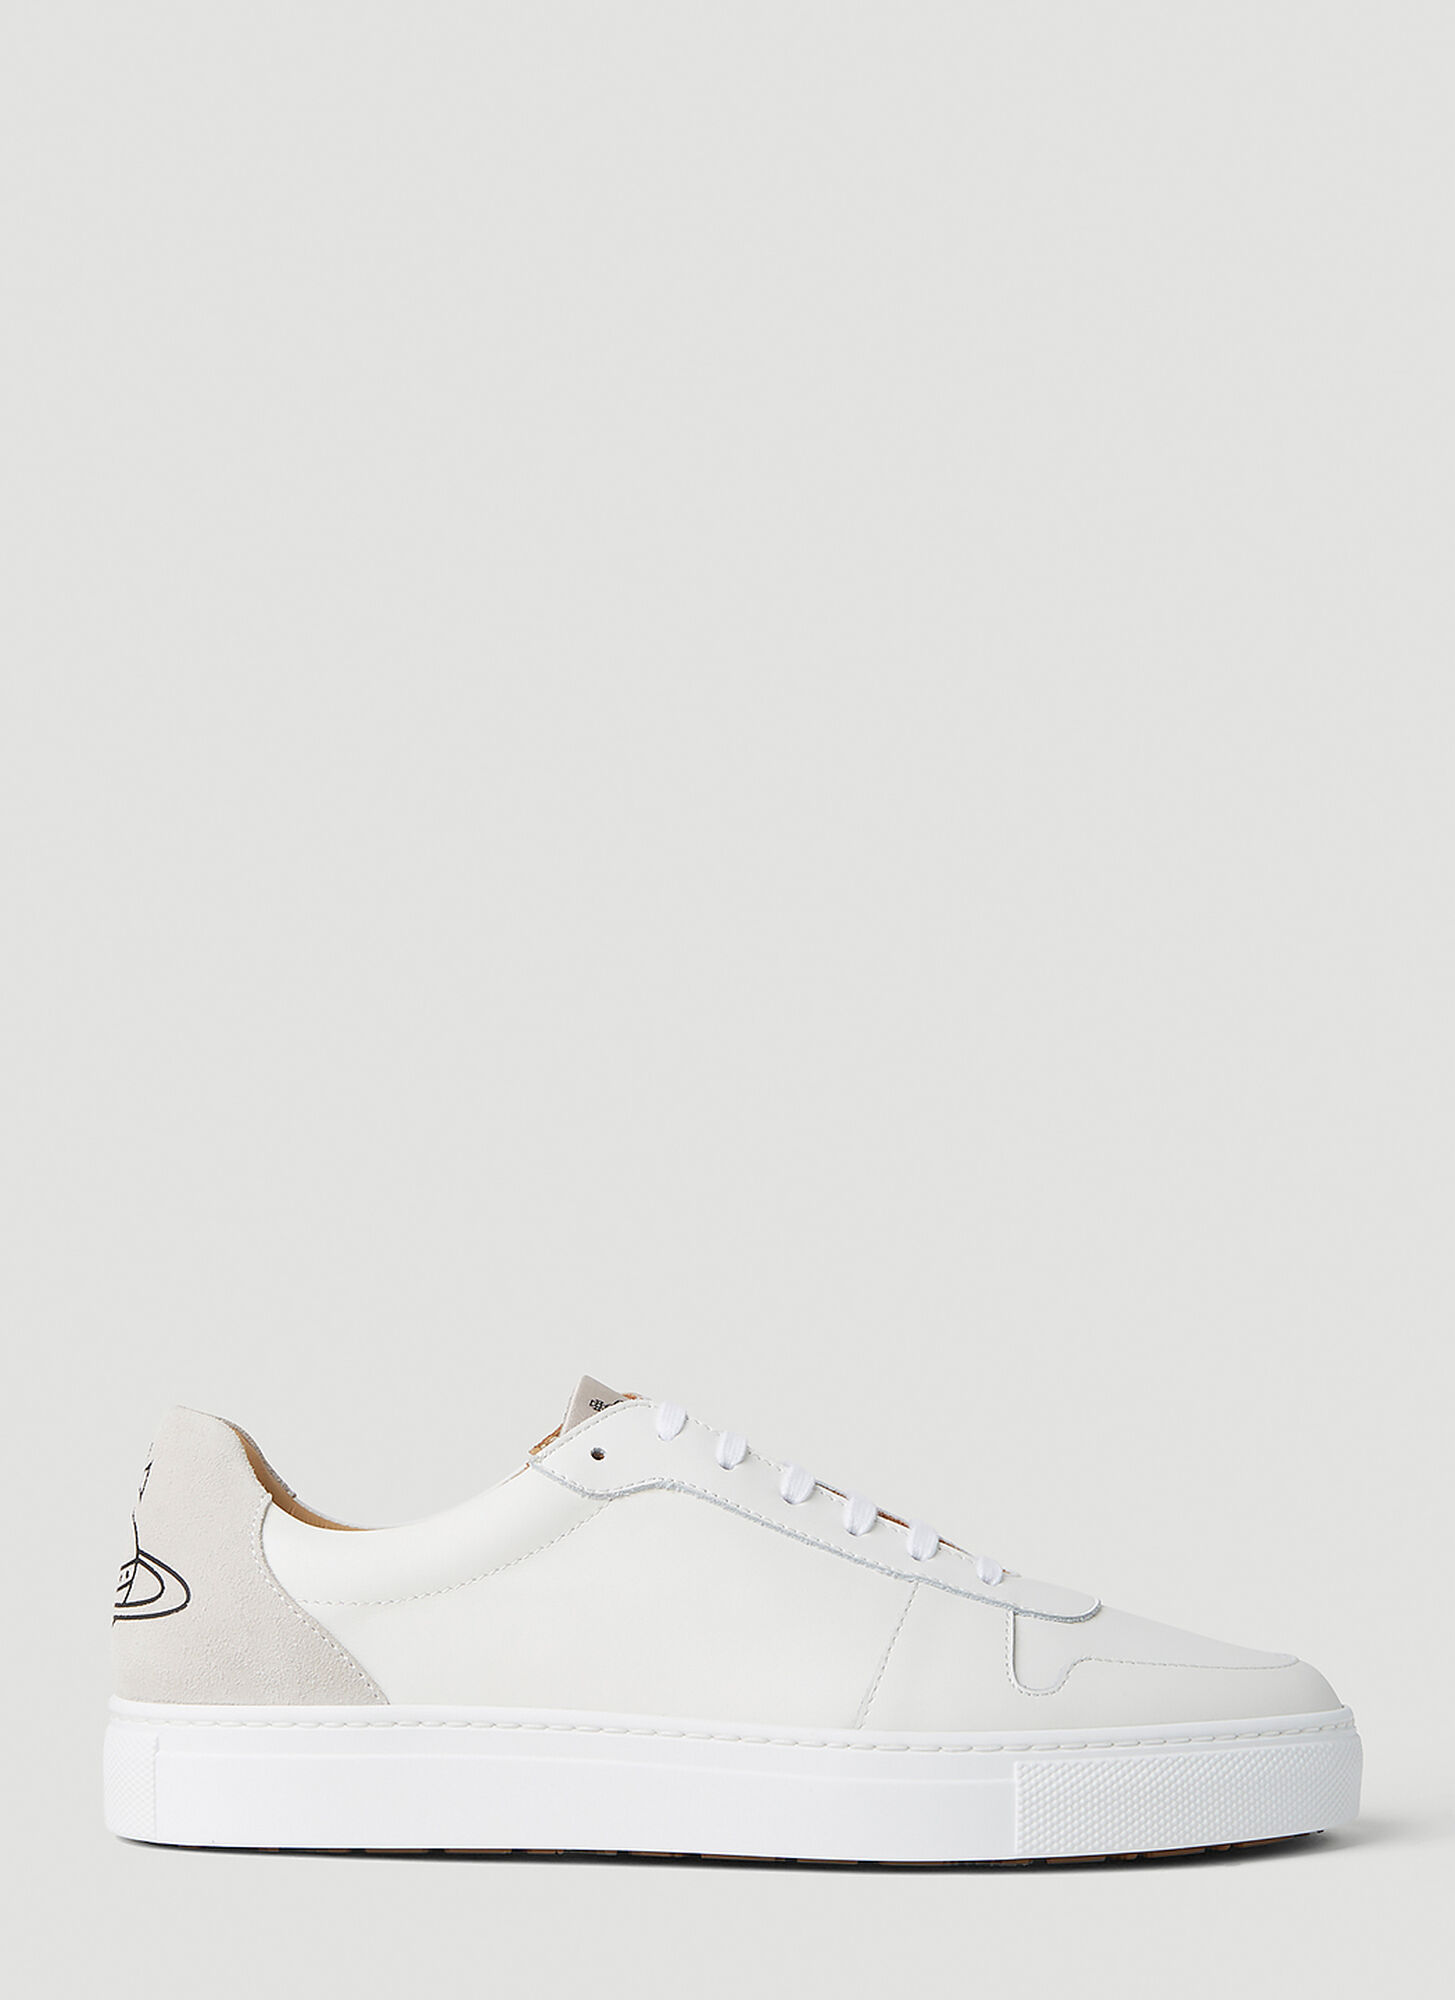 Vivienne Westwood Classic Orb Trainers In White